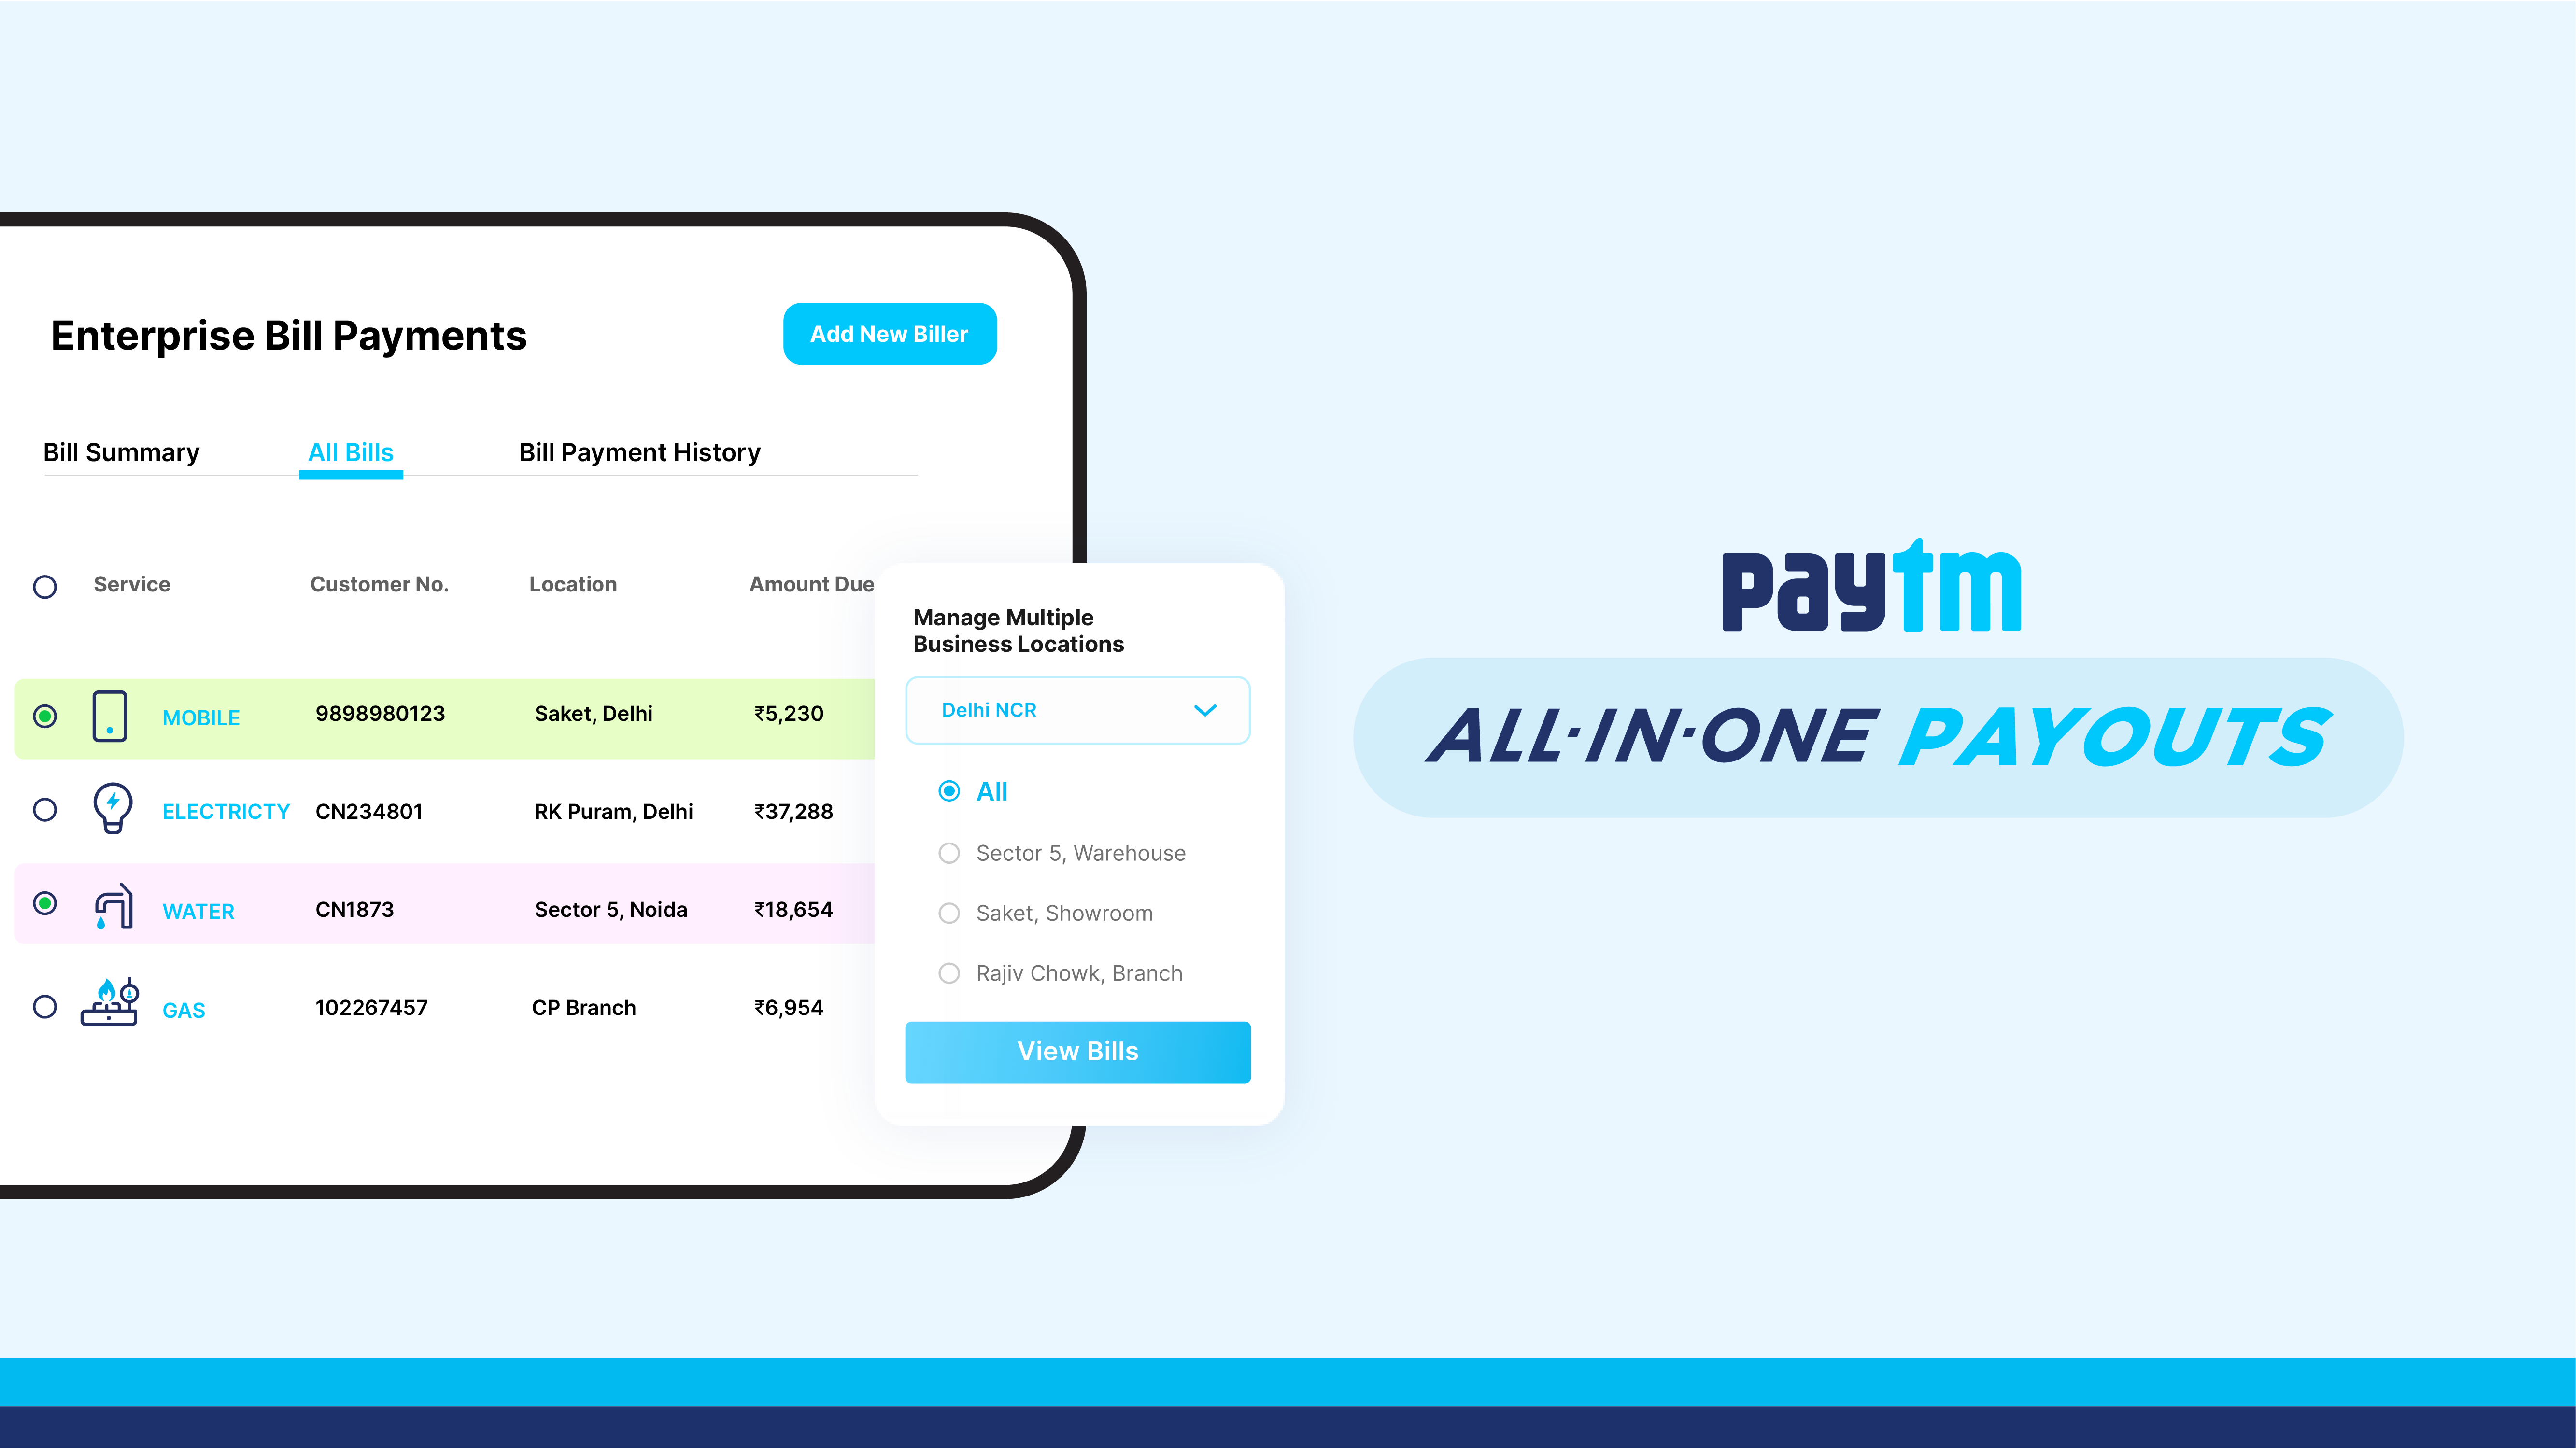 paytm-payouts-enterprise-bill-payment-system-aims-at-rs-3000-crores